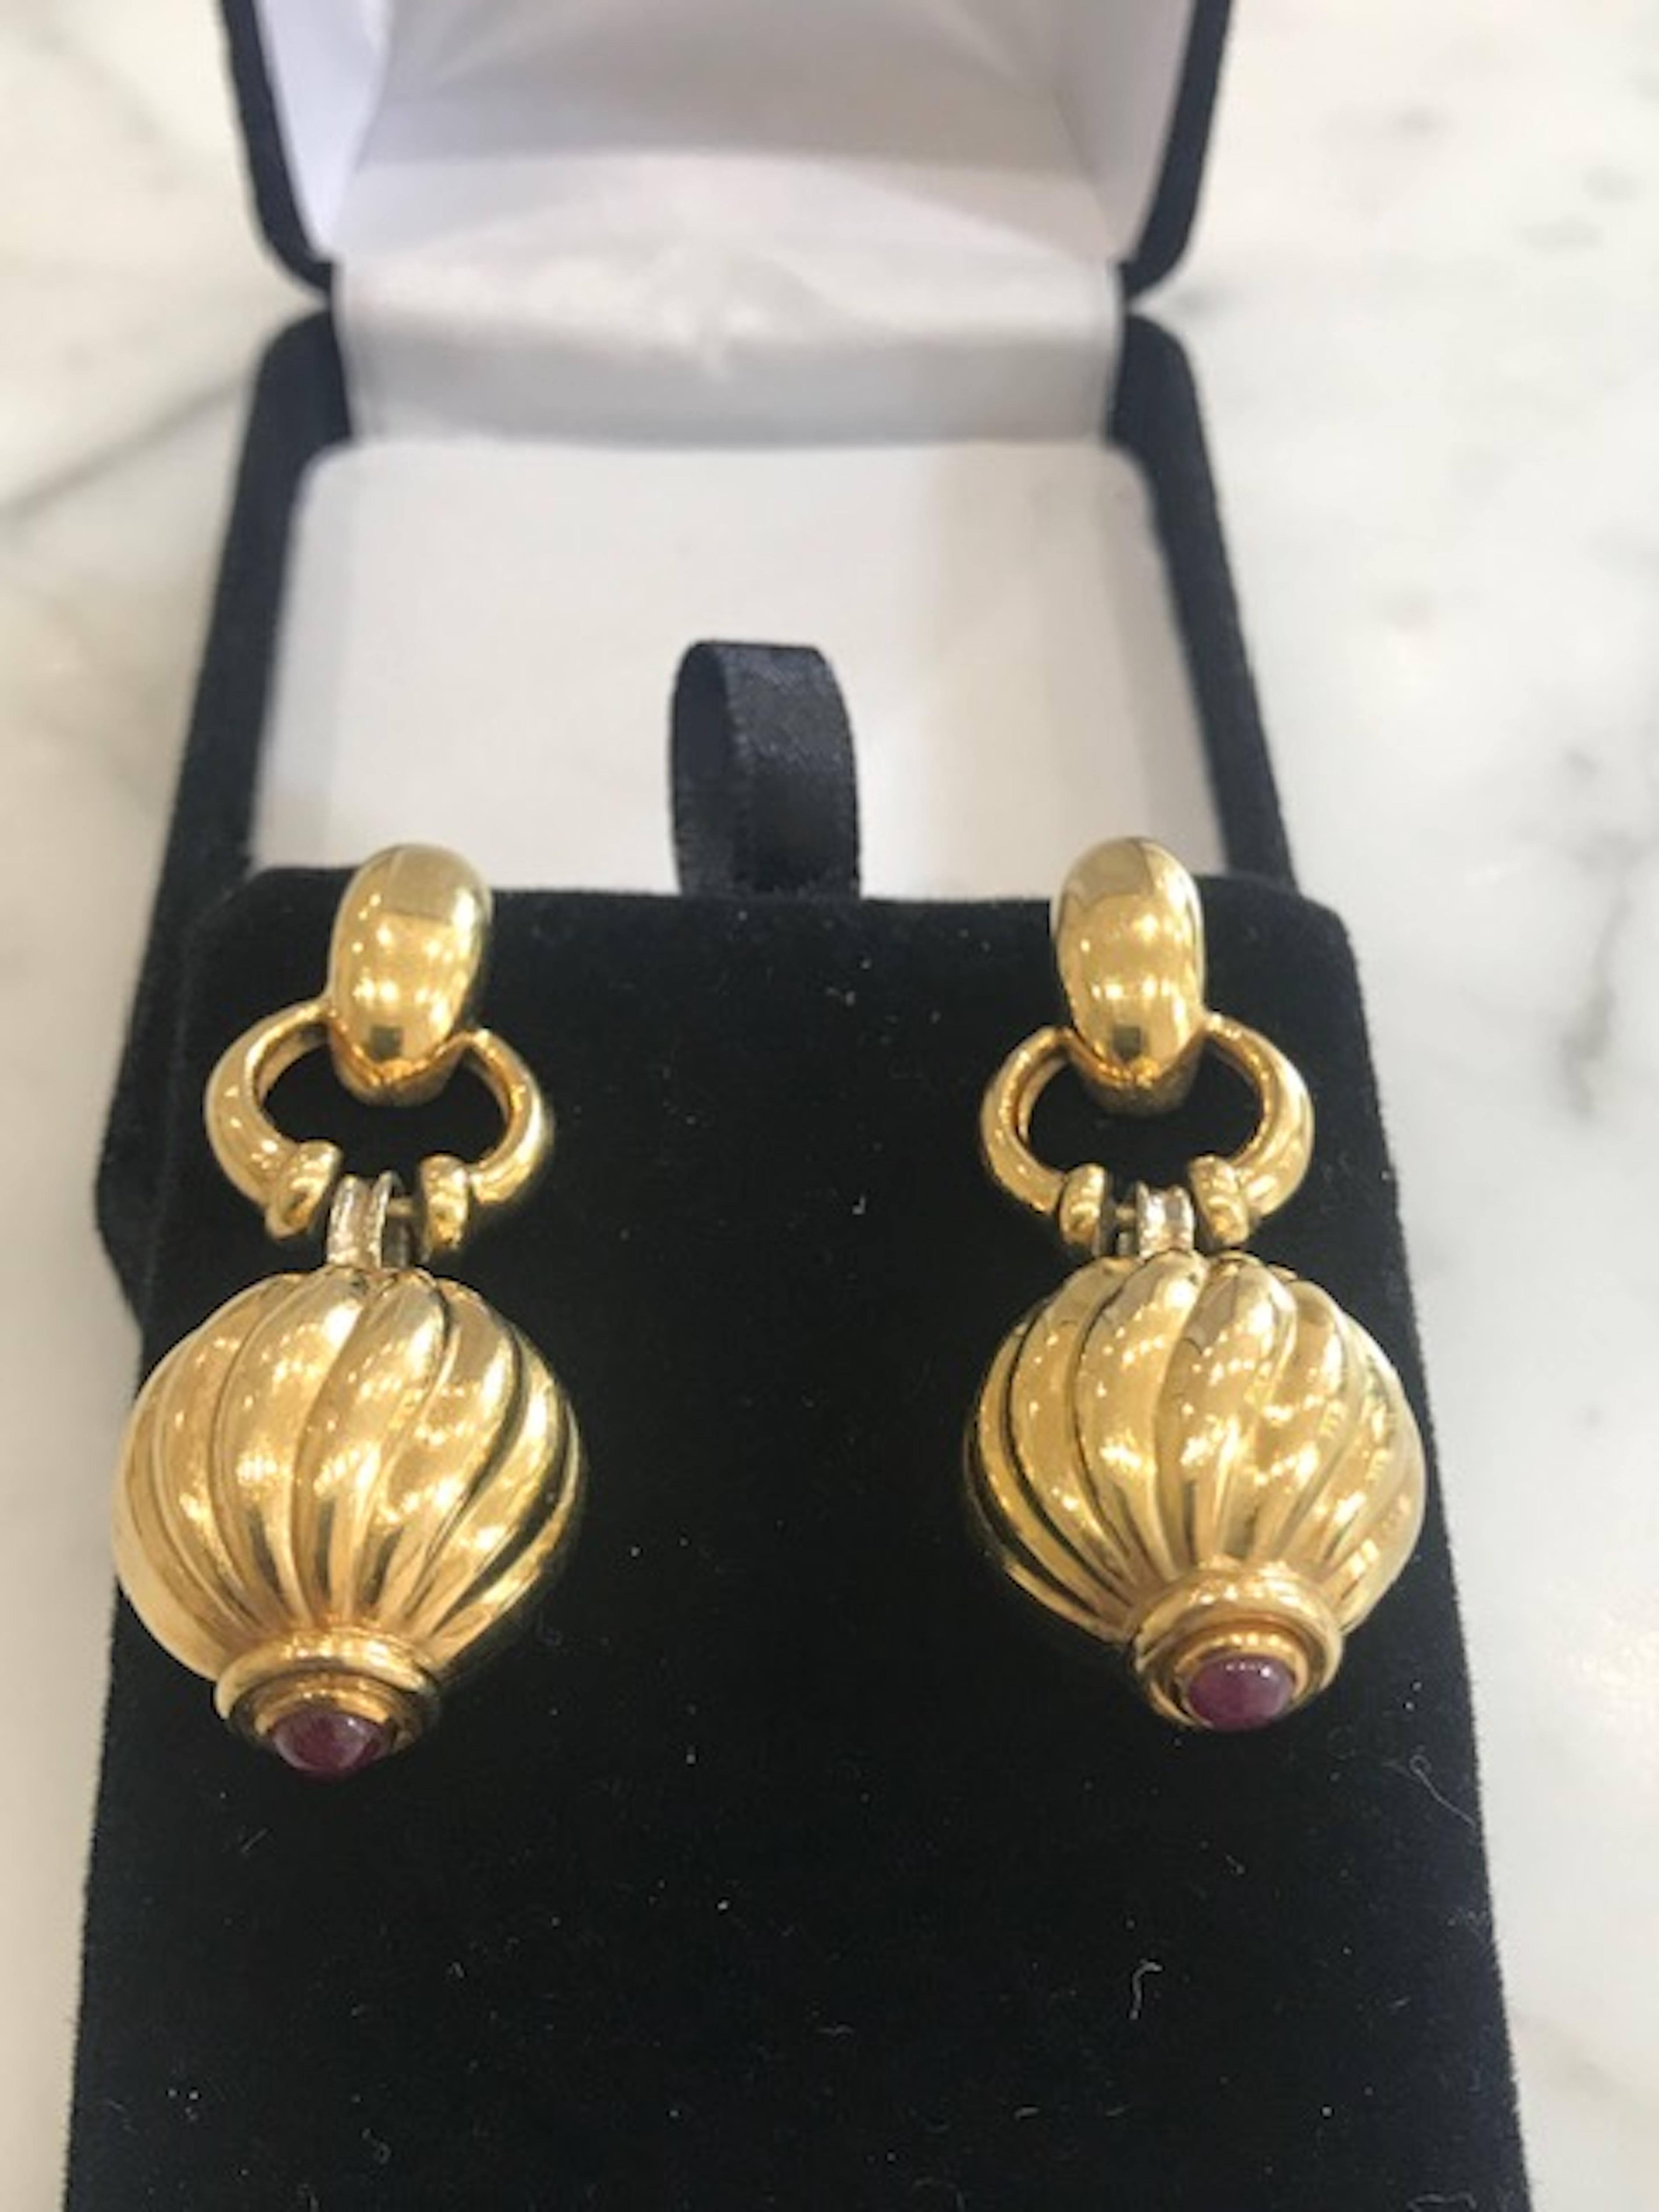 Door Knocker 18 Carat Ribbed Gold Earrings with Ruby Cabochon Finials In Good Condition For Sale In London, GB